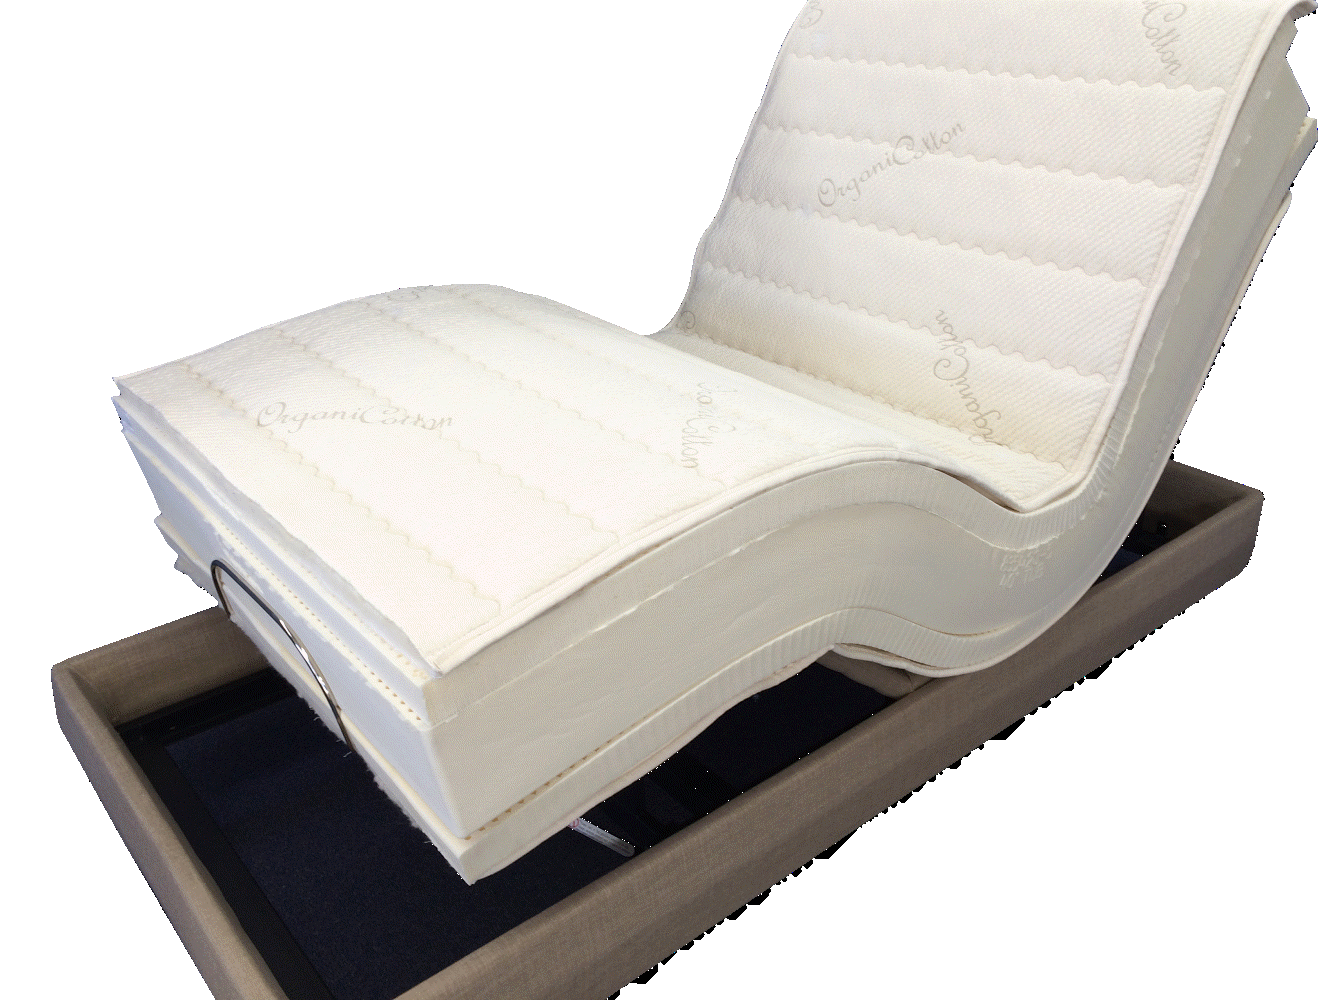 Phoenix Whole Mattress GOLS GOTS 100% Natural Organic Latex Mattress Pure Talalay Foam. Compare to Certified Organic Dunlop - available in Soft, Regular Firm, Extra Firm and Ultra Firm. FACTORY DIRECT - Why Pay Retail for the best mattress in the World!